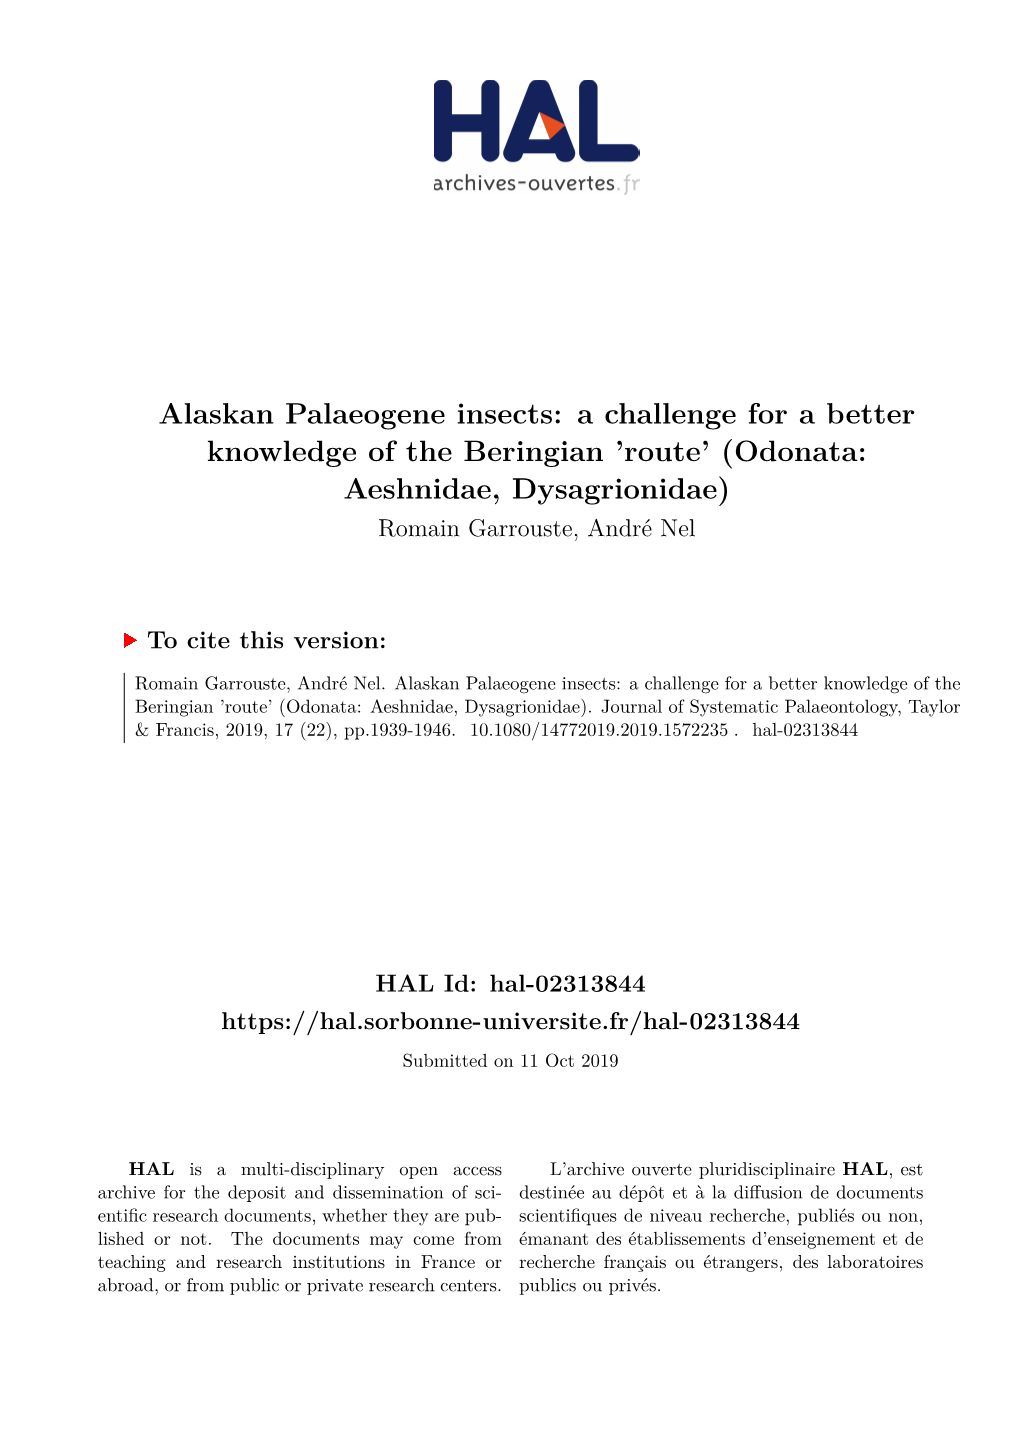 Alaskan Palaeogene Insects: a Challenge for a Better Knowledge of the Beringian ’Route’ (Odonata: Aeshnidae, Dysagrionidae) Romain Garrouste, André Nel